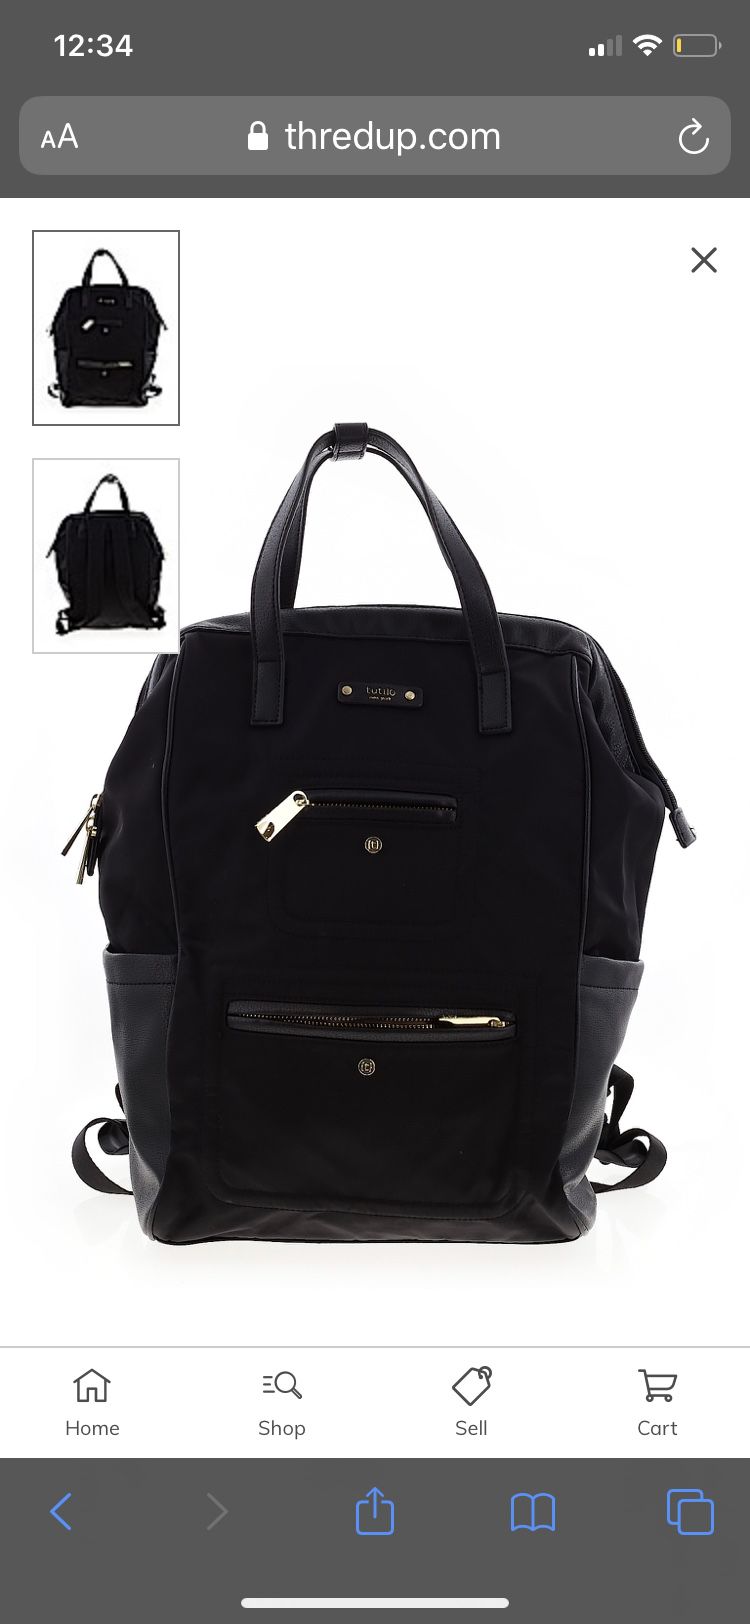 Título backpack black perfect for laptop